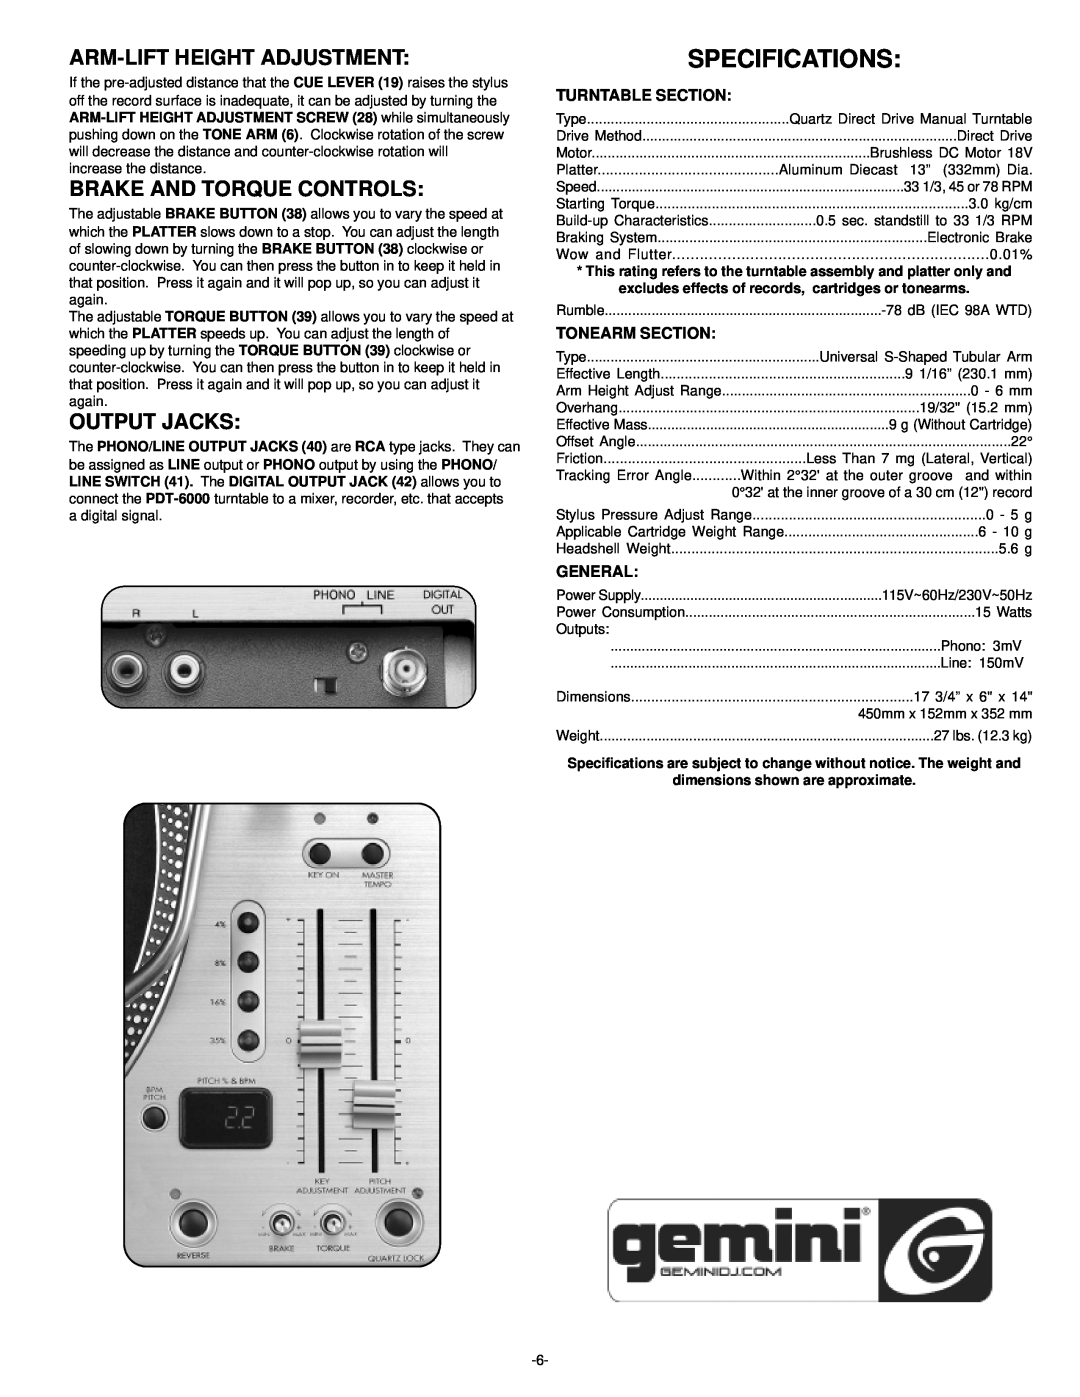 Gemini PDT-6000 Specifications, Arm-Liftheight Adjustment, Brake And Torque Controls, Output Jacks, Turntable Section 